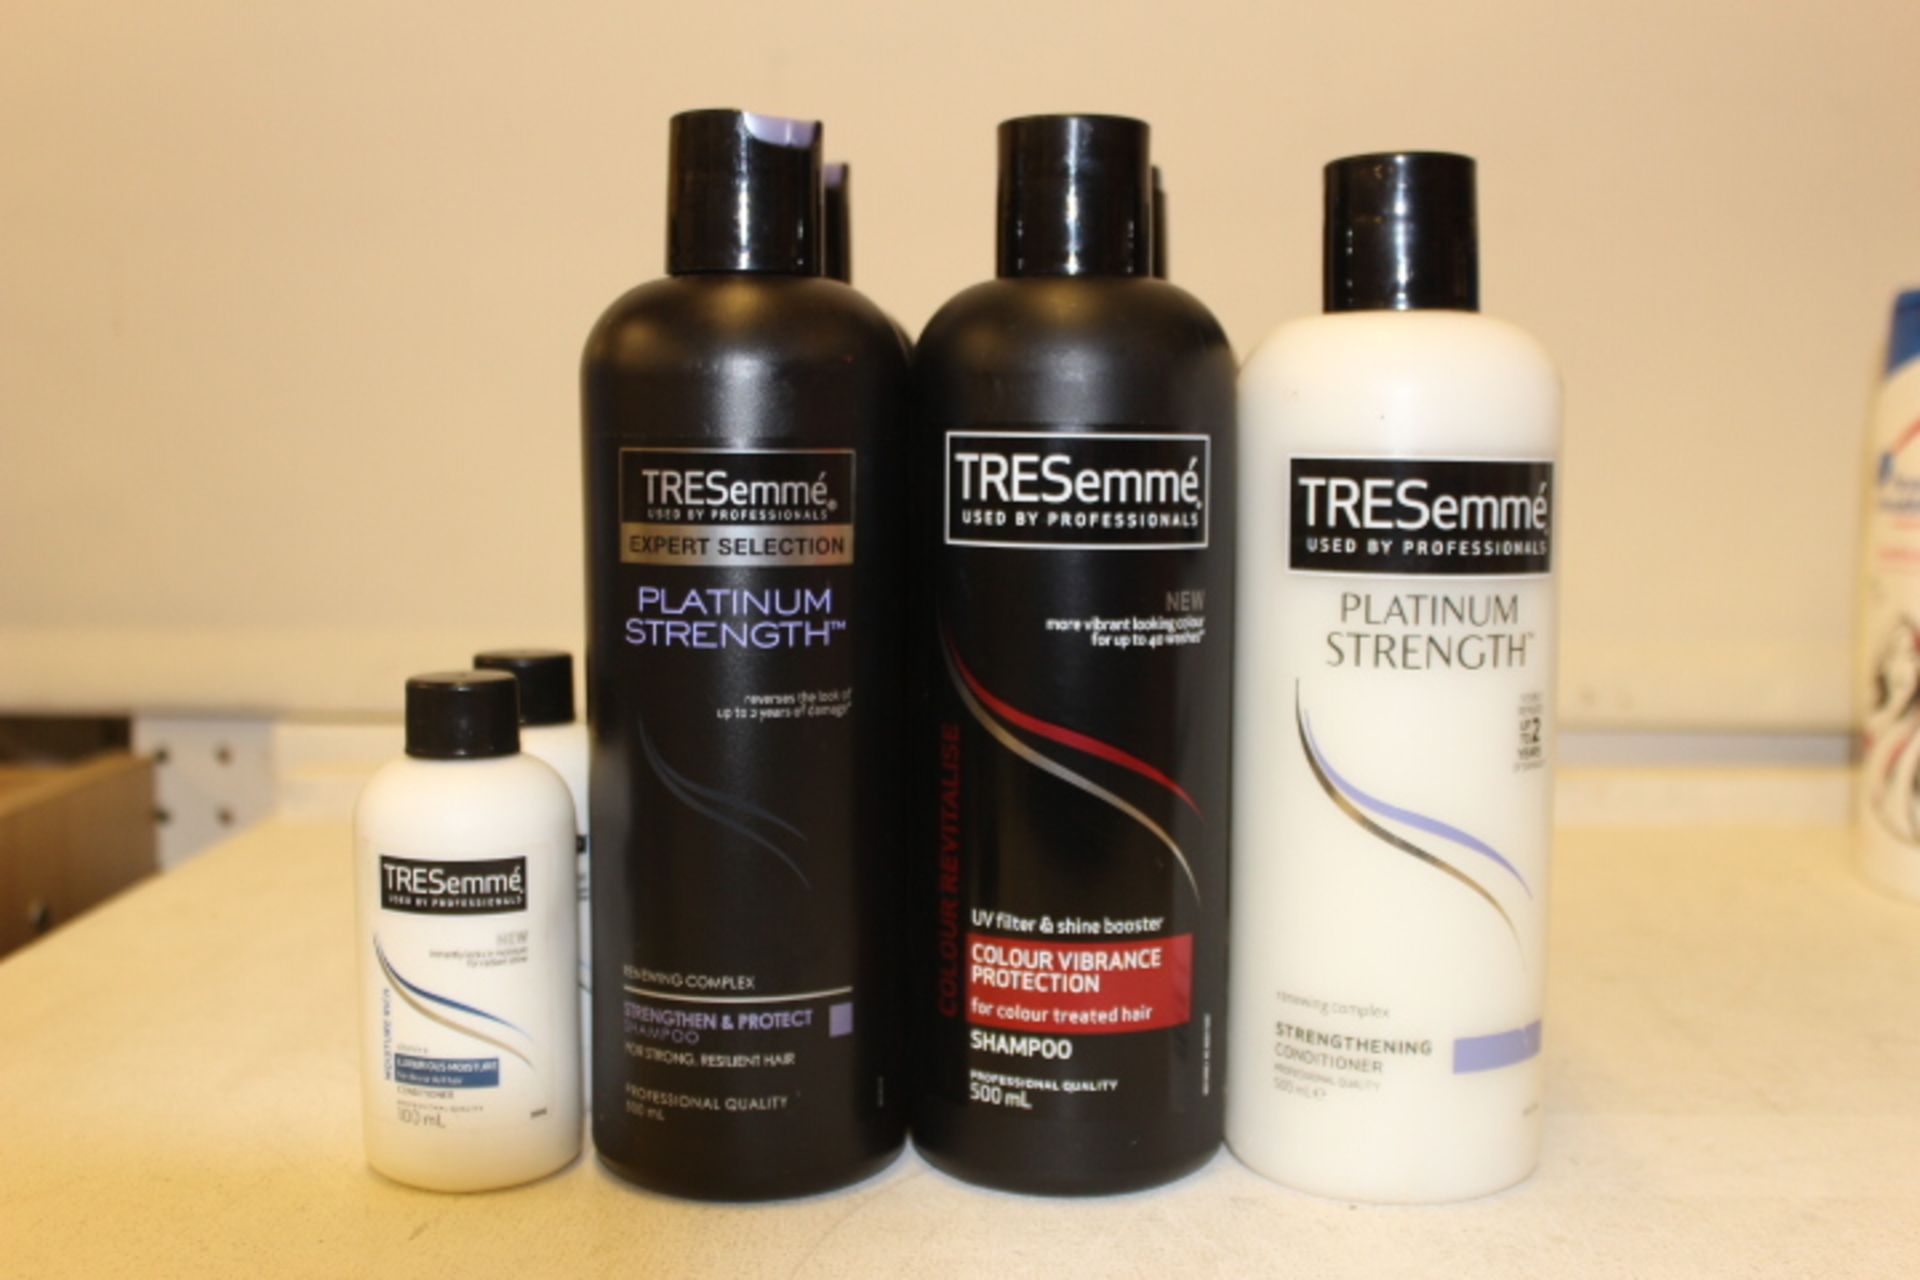 V *TRADE QTY* Grade A A Lot Of Five TRESemme 500ml Shampoo-Two 500ml TRESemme Conditioners & Two